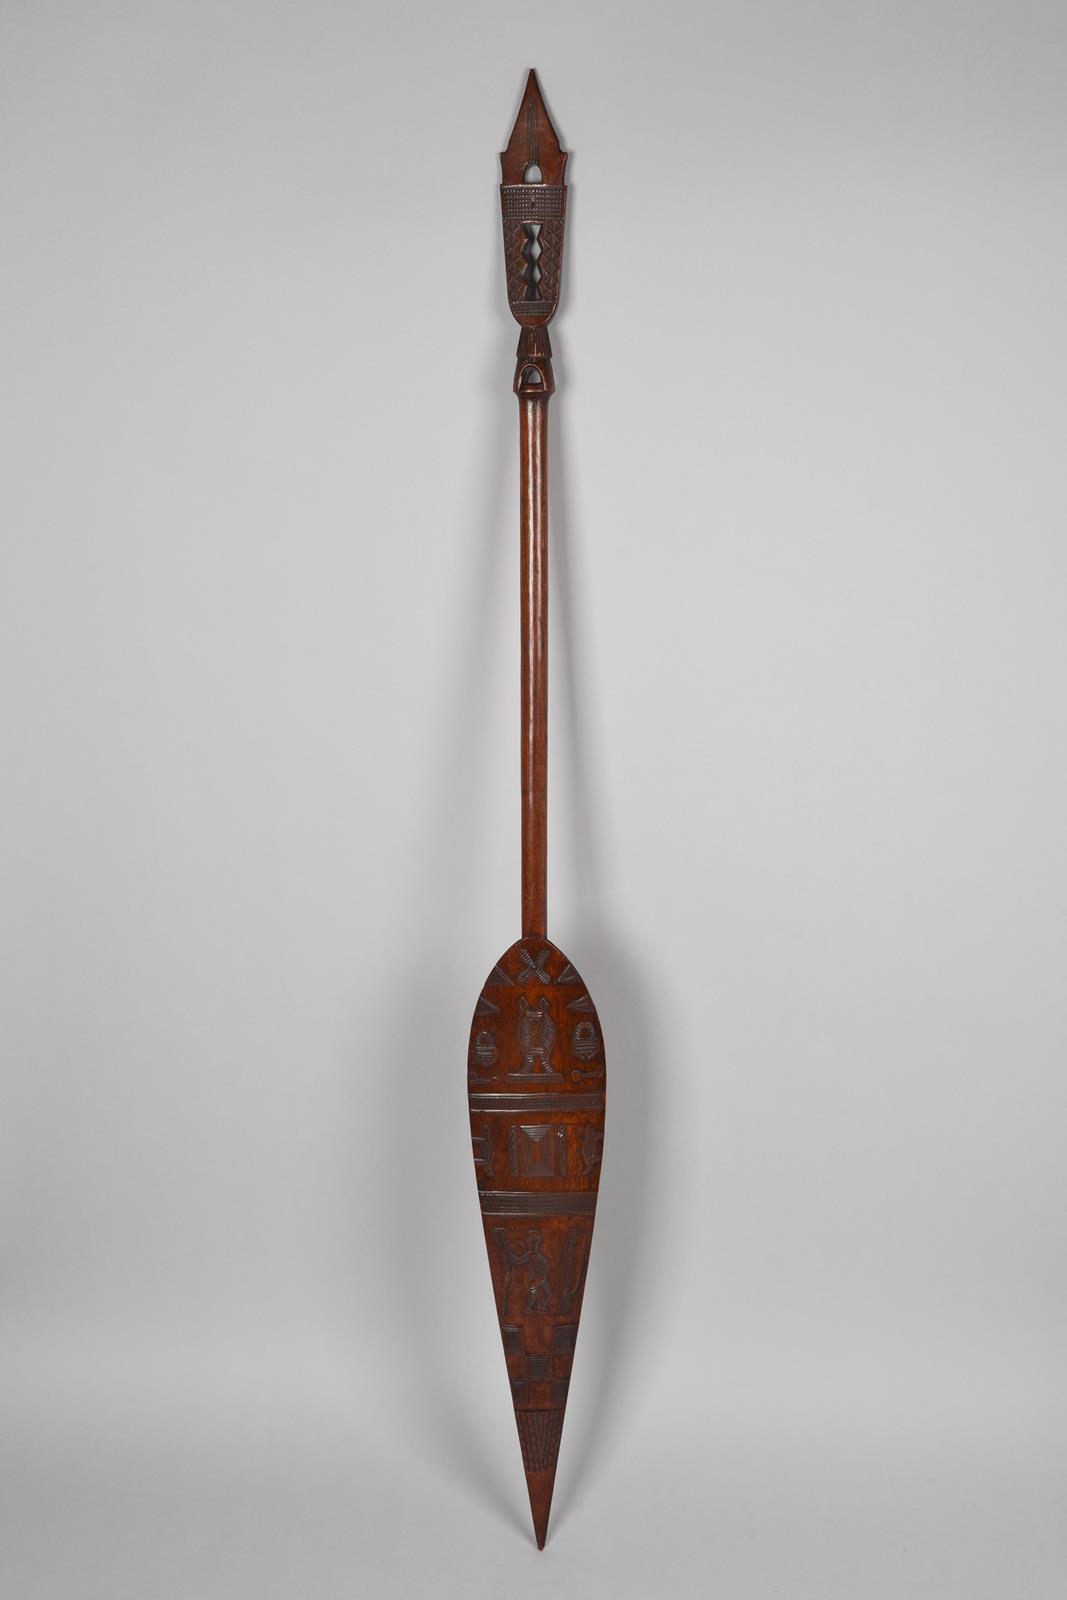 A Duala paddle Cameroon the blade with low relief carving of animals, padlocks, keys, scissors, - Image 2 of 5